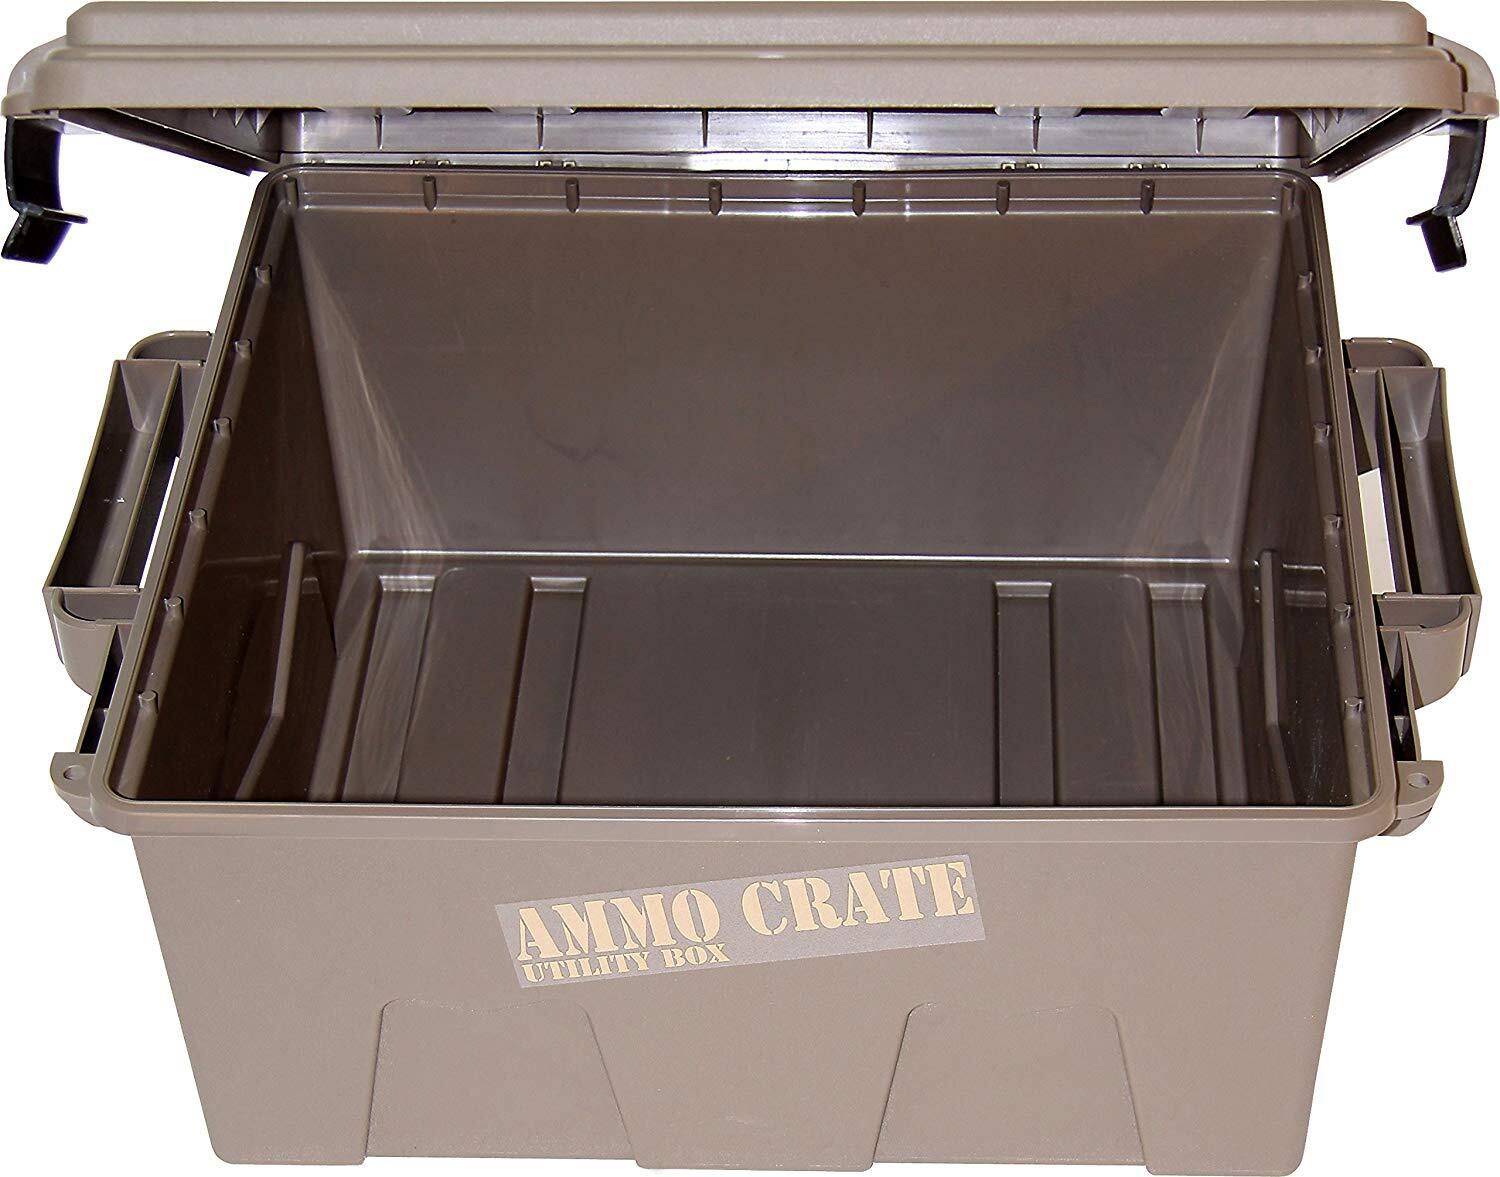 Pack of 2. MTM ACR8-72 Ammo Crate Utility Box with 7.25 Deep Large Dark Earth 